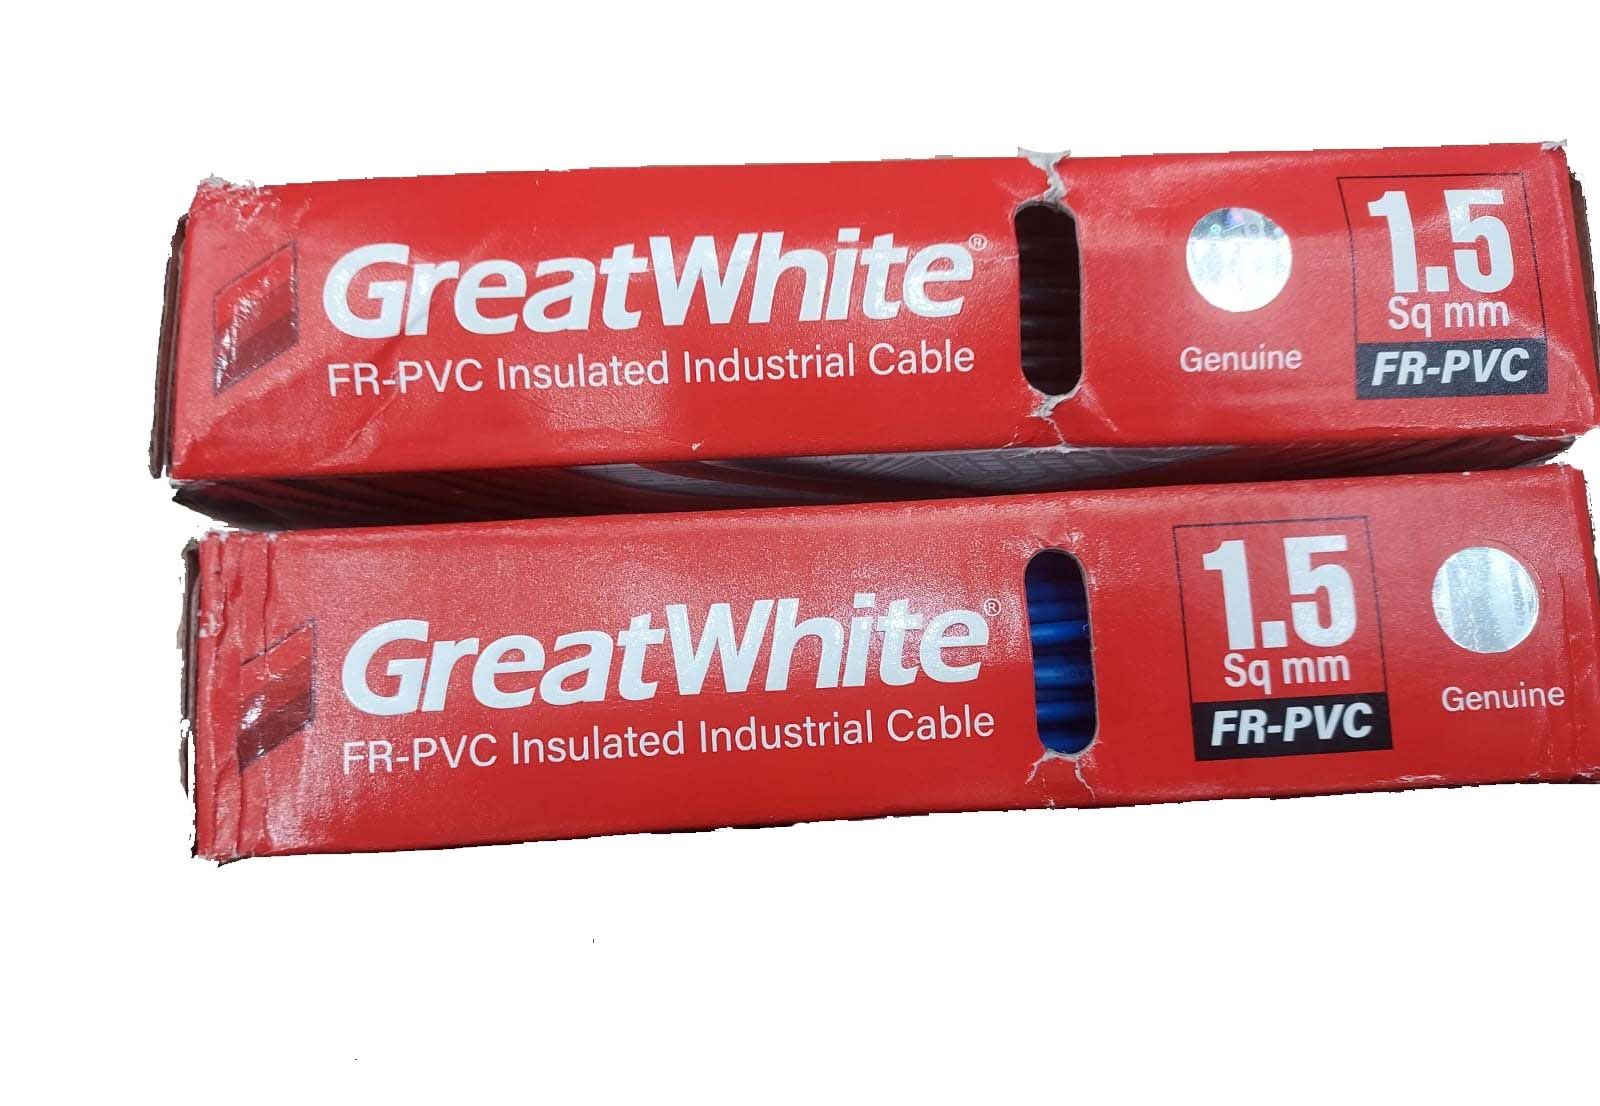 GREATWHITE SecureX 1.5MM TRIPLE LAYERED WITH 105°C BASE PVC INSULATION COPPER CABLE 90MTR LENGTH (FIRE RETARDENT) ( 08W CFL FREE 1PCS )